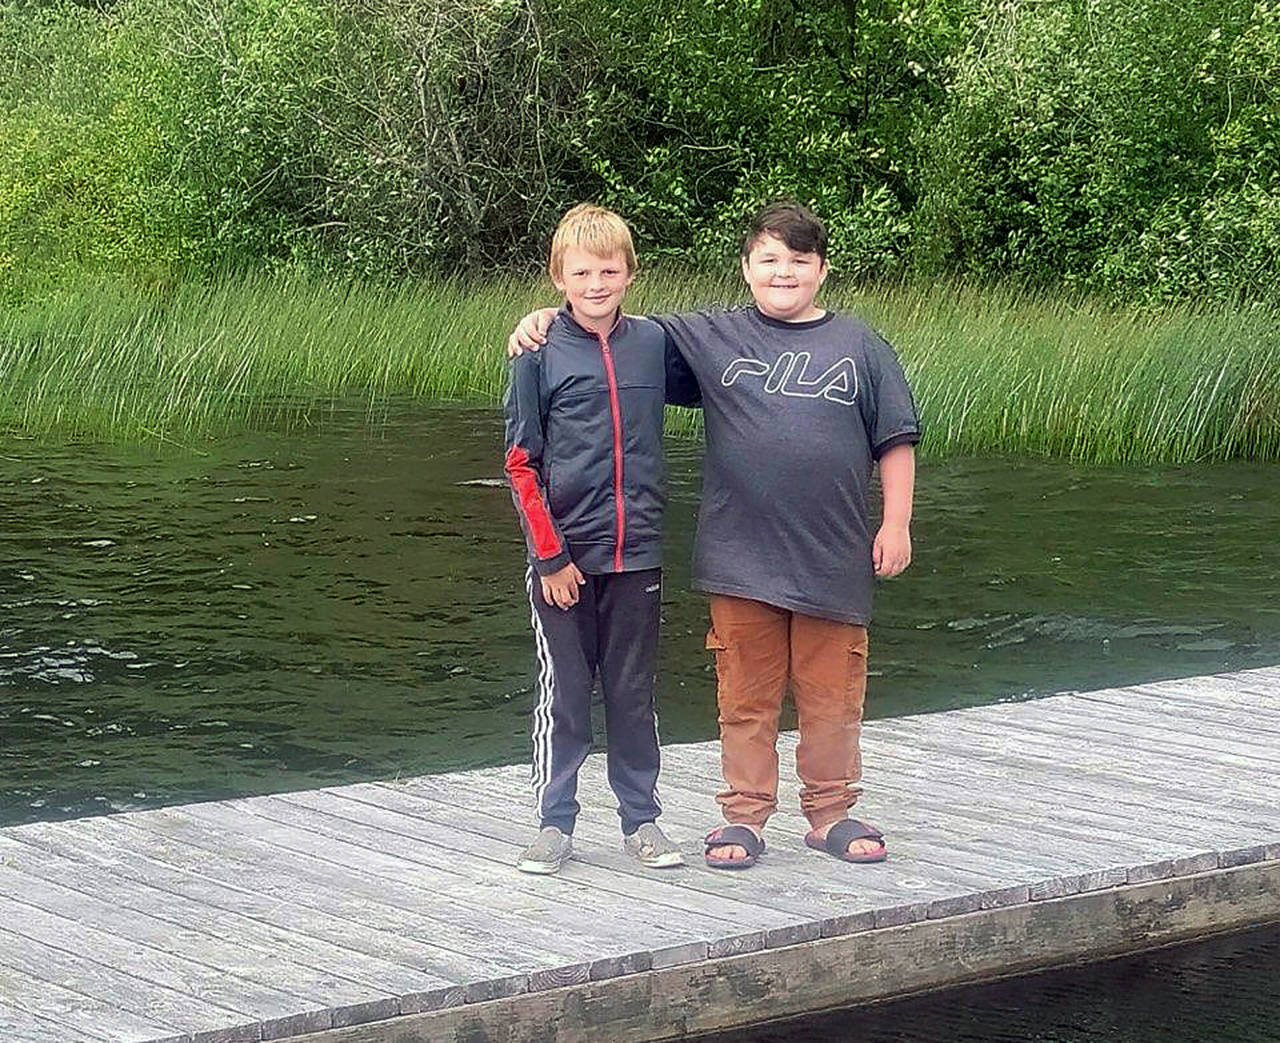 Mason Slattum (left) and his cousin Blake Ogden saved a 3-year-old from drowning in Deer Lake. (Contributed photo)